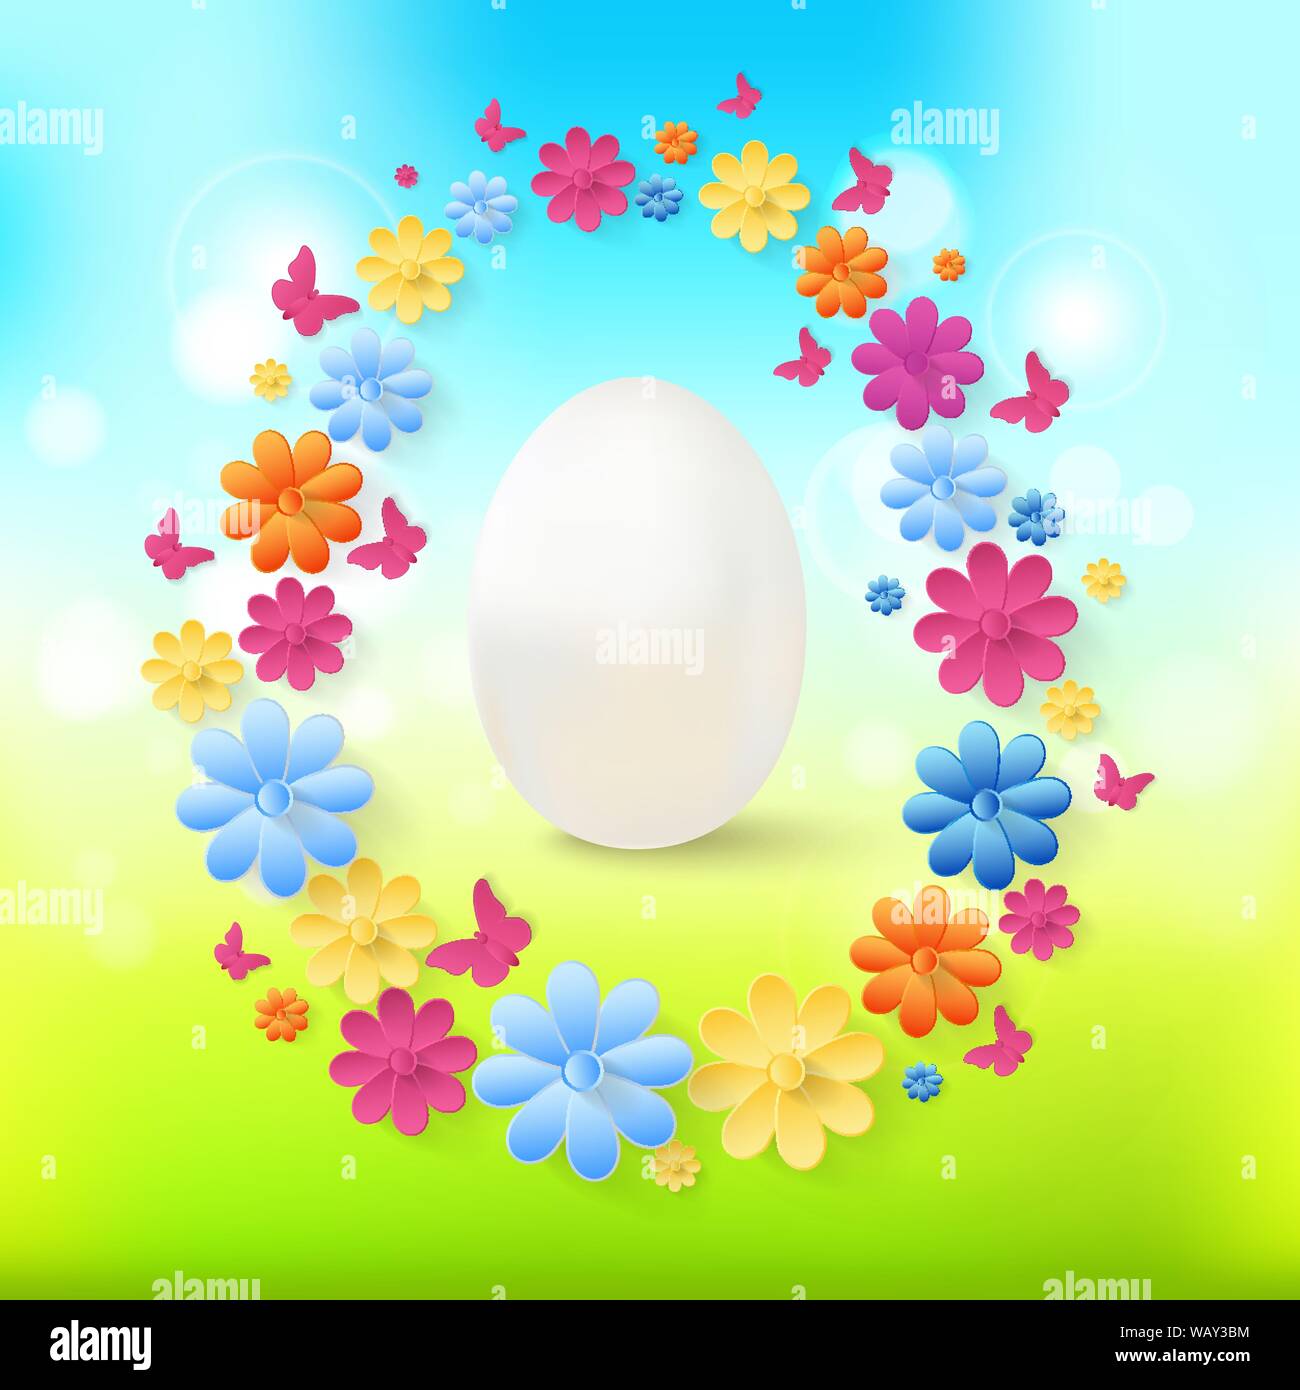 Easter eggs with colorful flowers, butterflies on spring background. Stock Vector